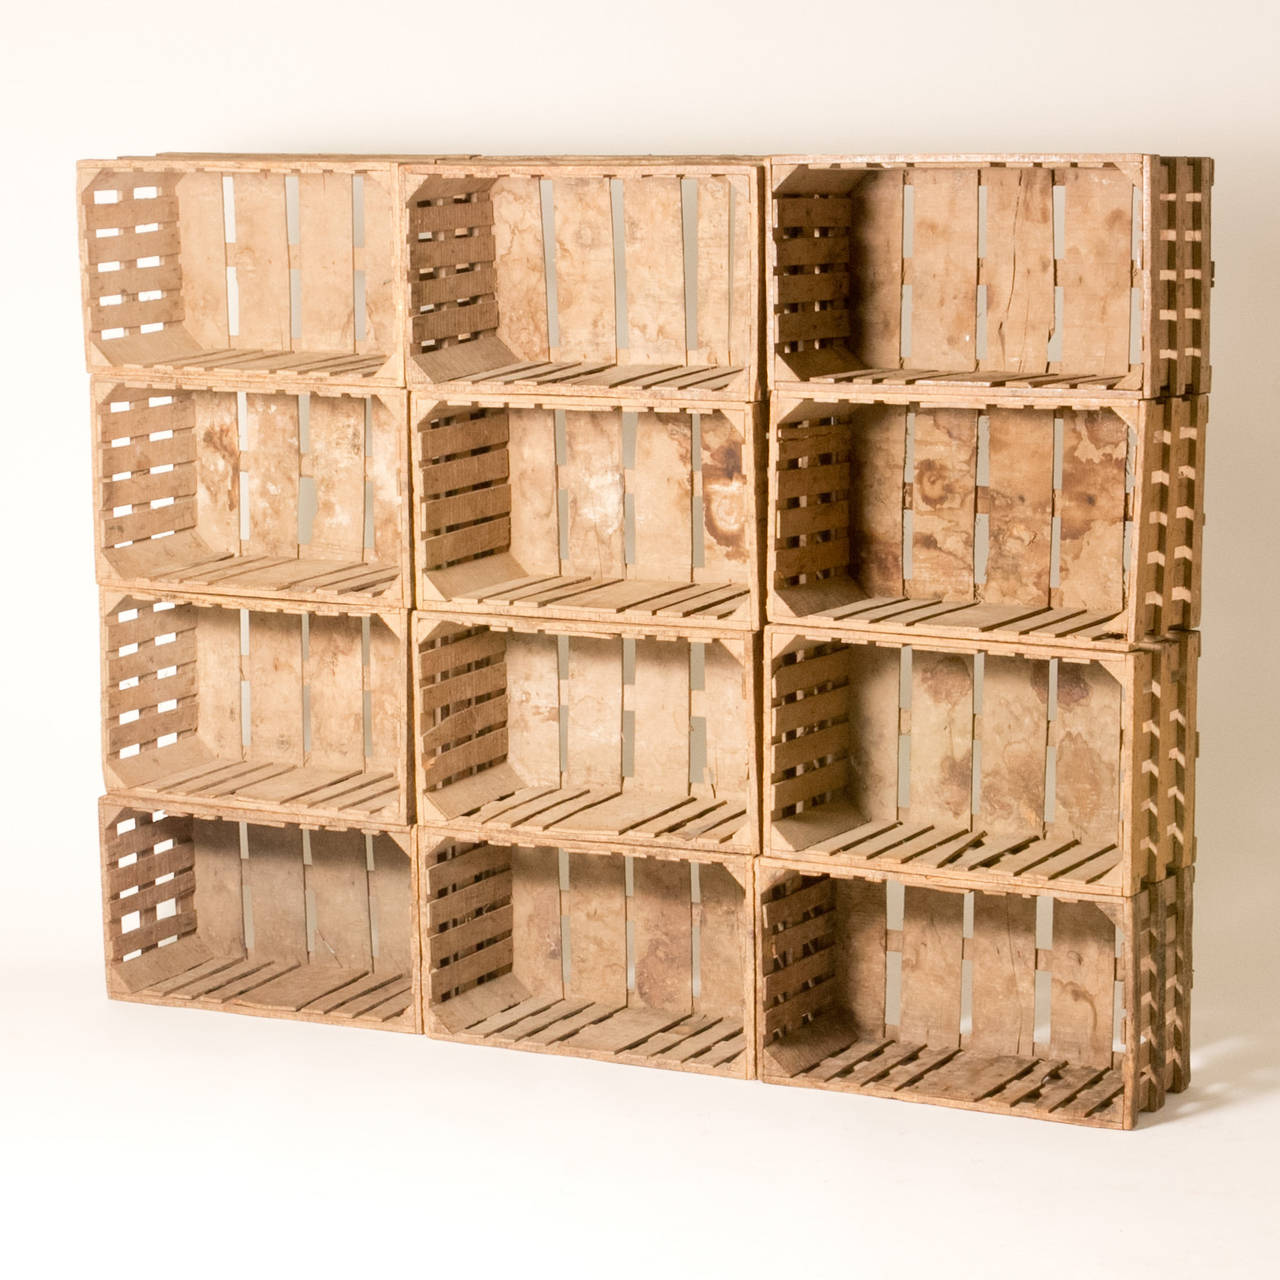 Bookcase made out of twelve blonde, exposed wood crates from early 20th-century France. With a wonderful patina and a raw, industrial sensibility, the crates provide a unique way to store and display books and objects. Can be purchased in multiples